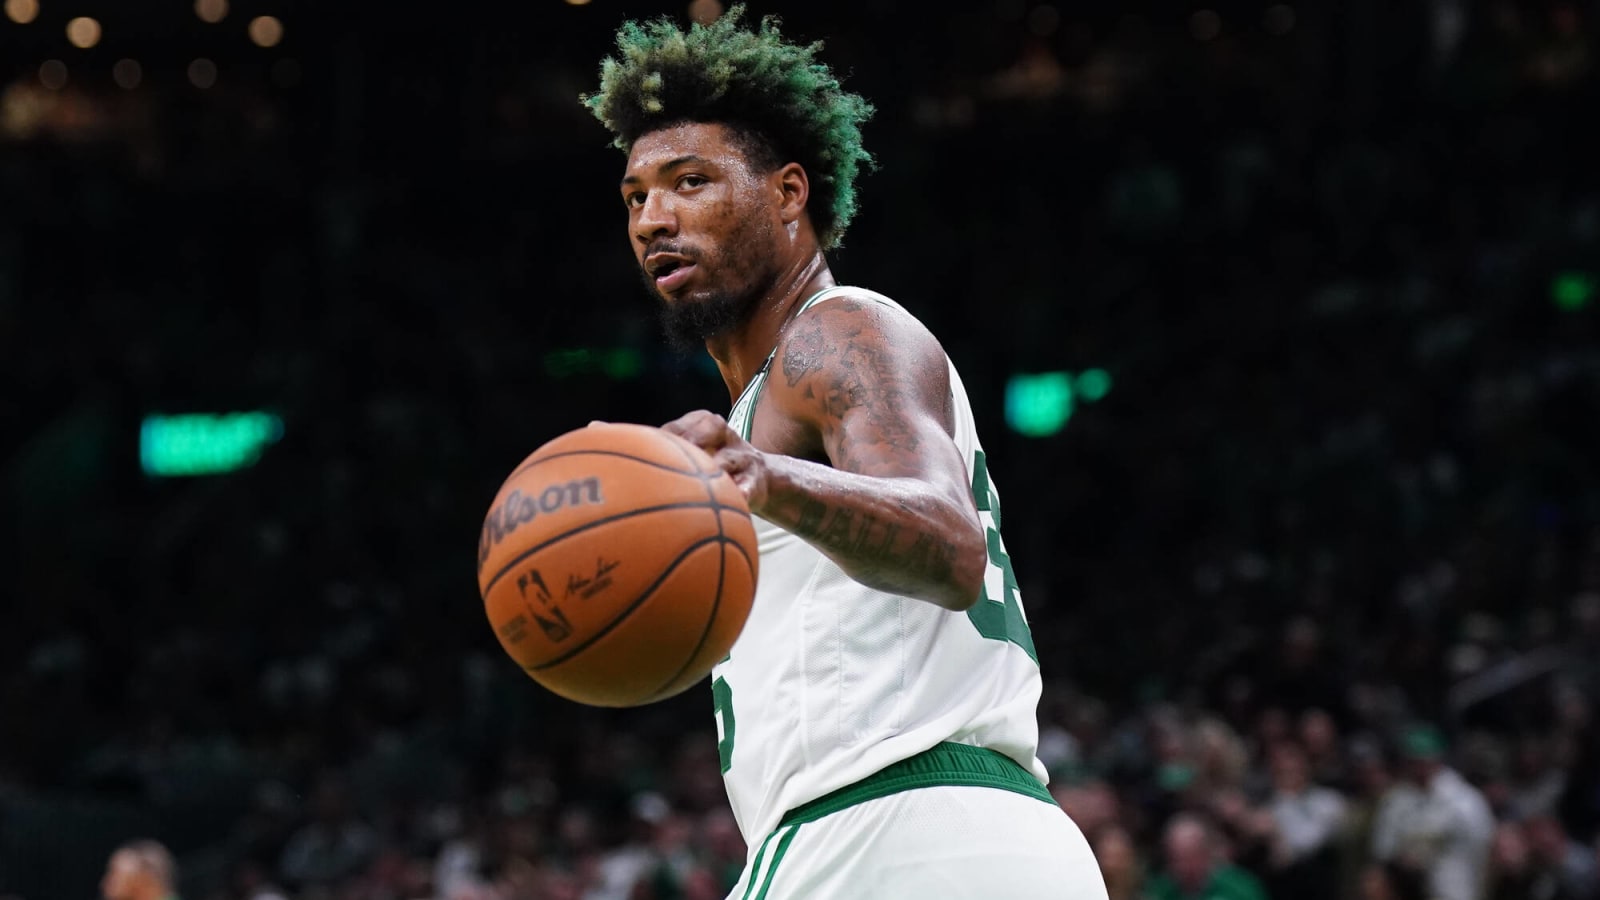 Lowry, Celtics' Smart dealing with injuries, Williams ready to go